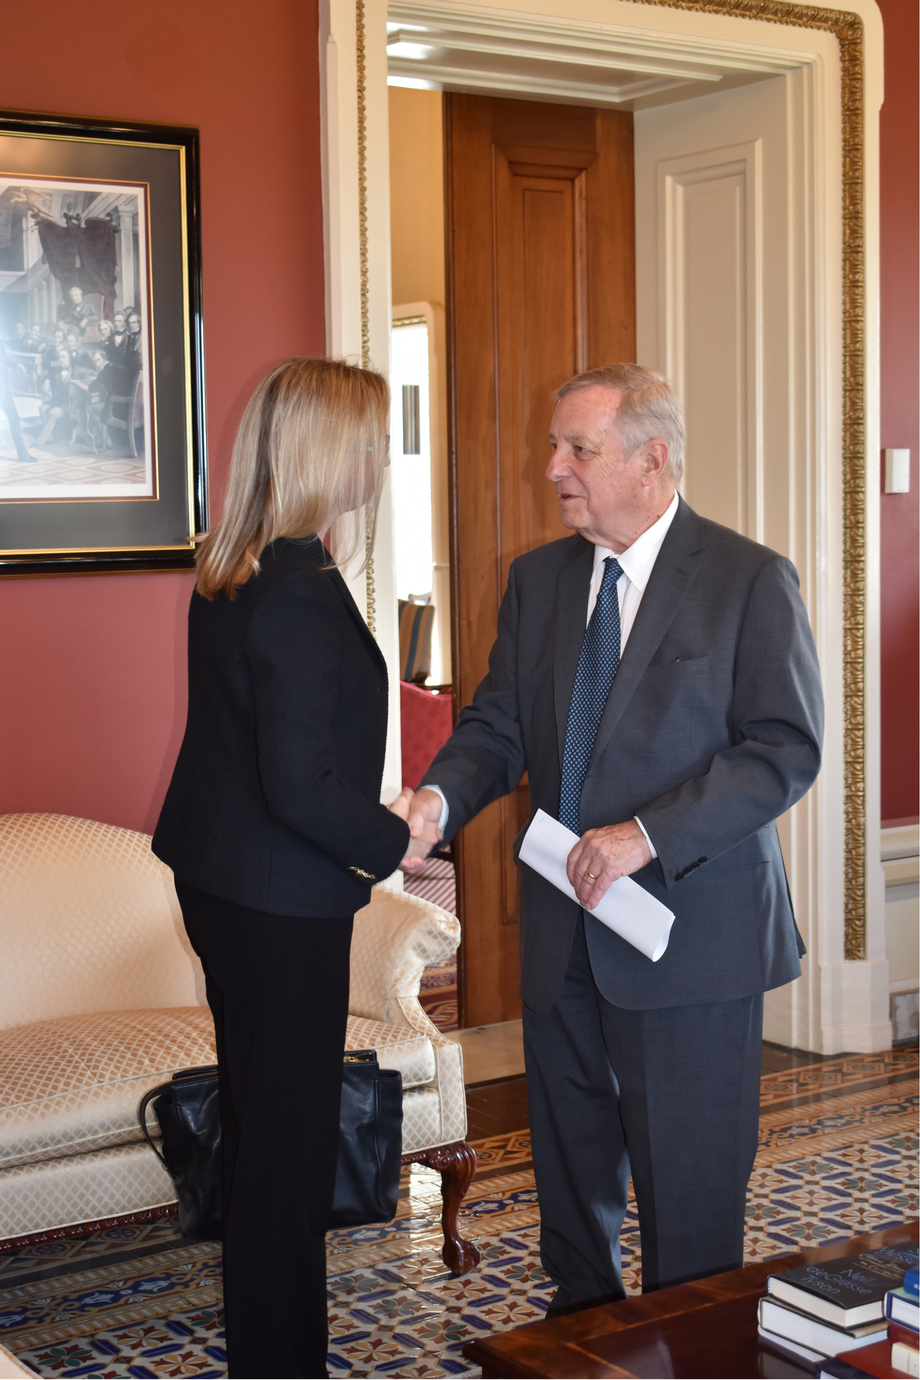 DURBIN MEETS WITH PRESIDENT BIDEN’S NOMINEE TO BE THE U.S. AMBASSADOR TO LITHUANIA